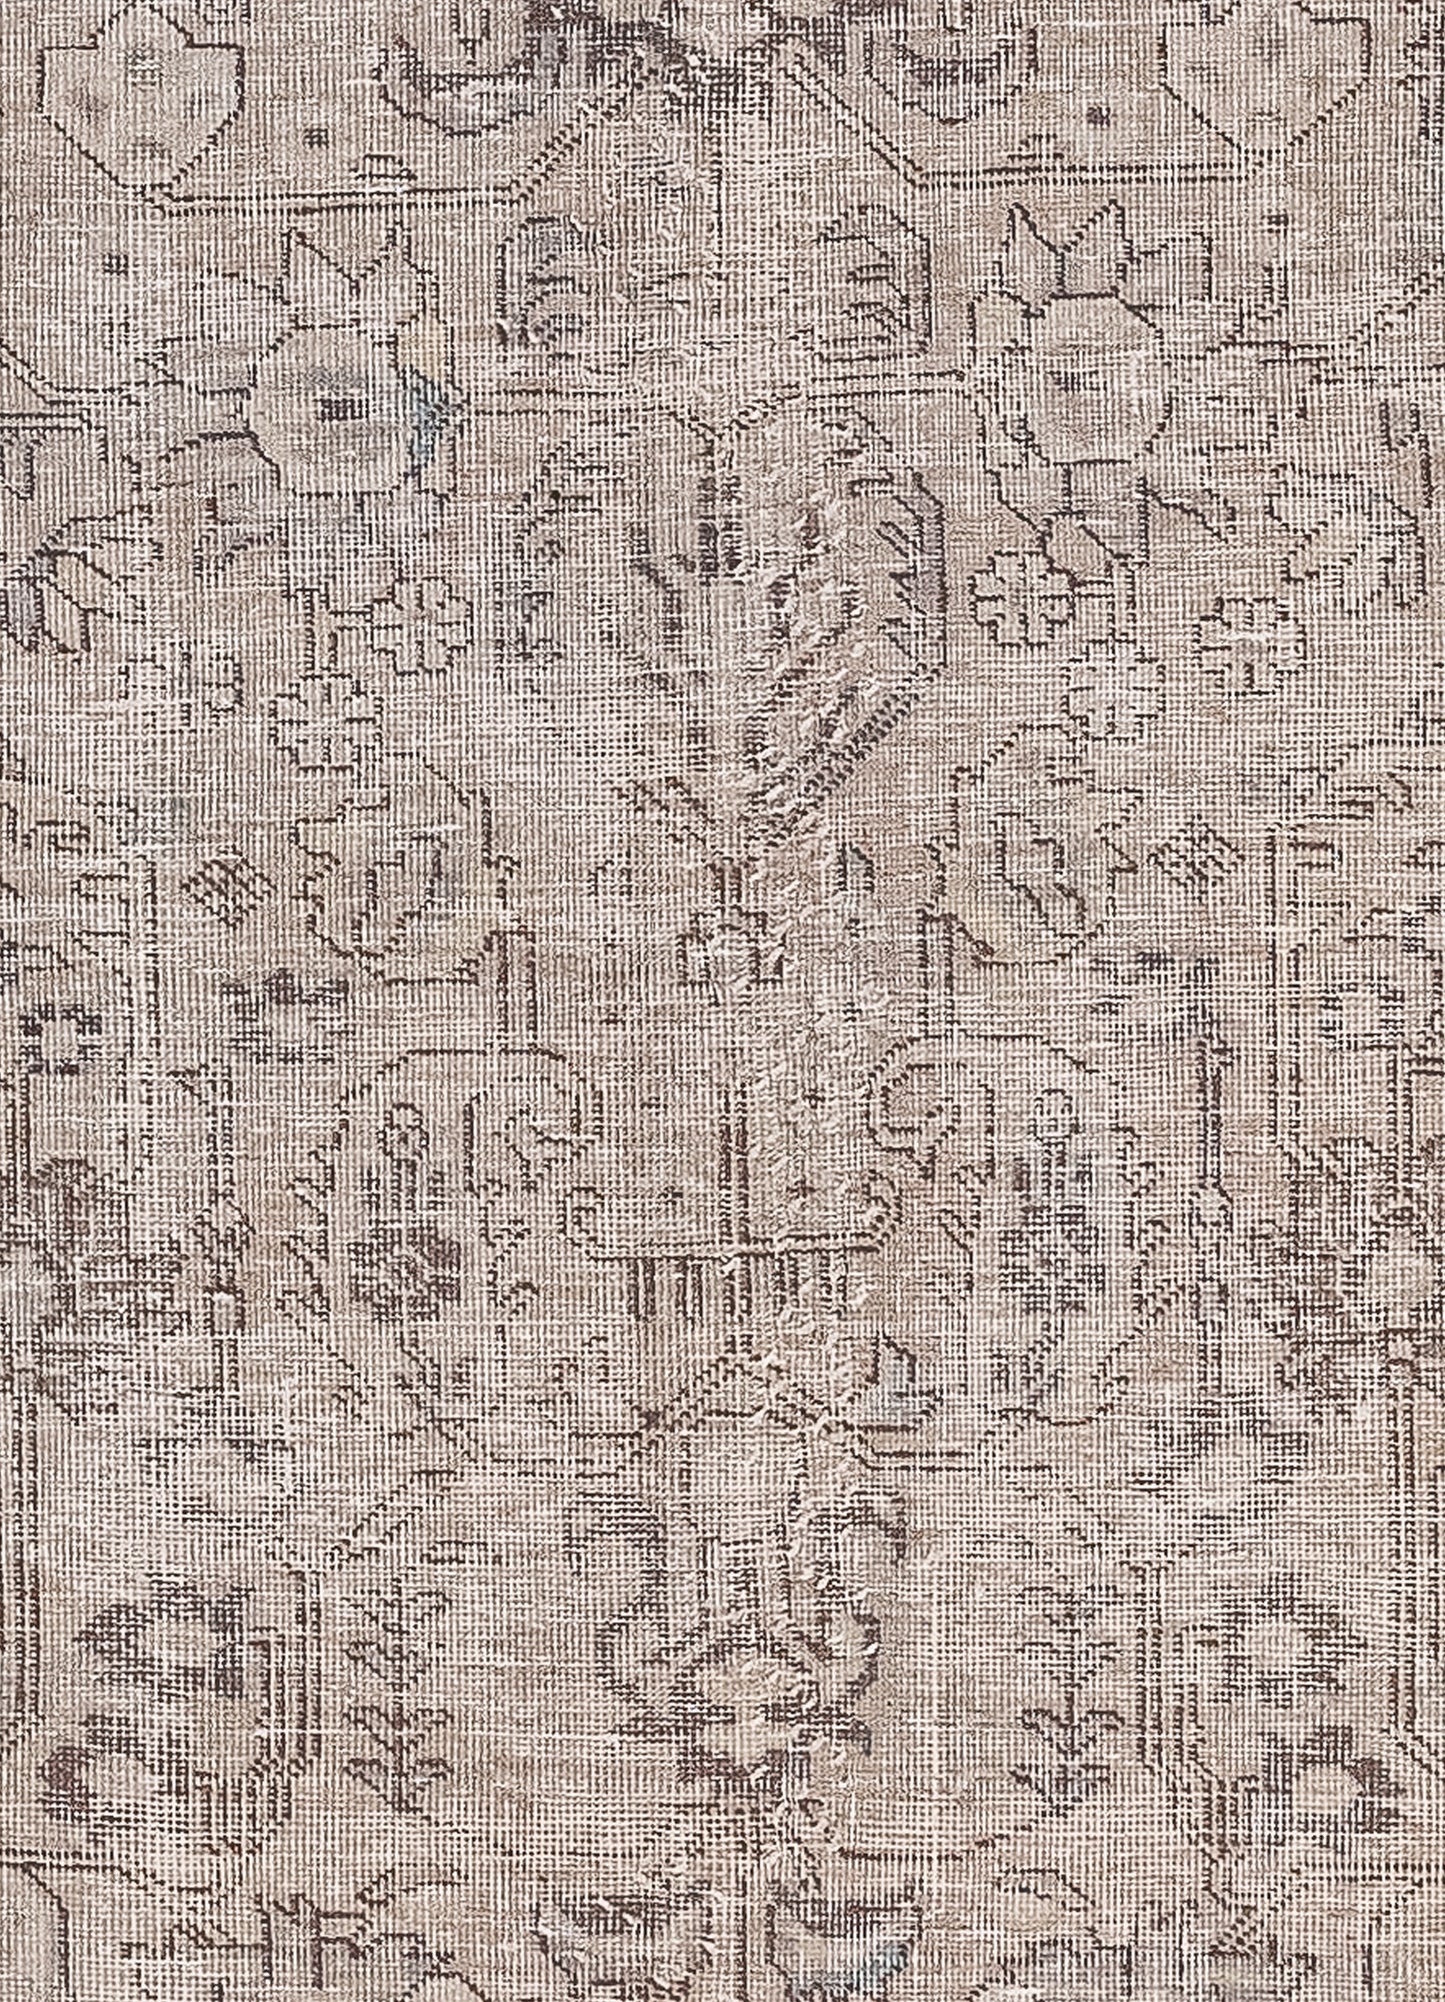 The center of the rug features outlined leaf shapes, gardenas, branches, and some embellishments.